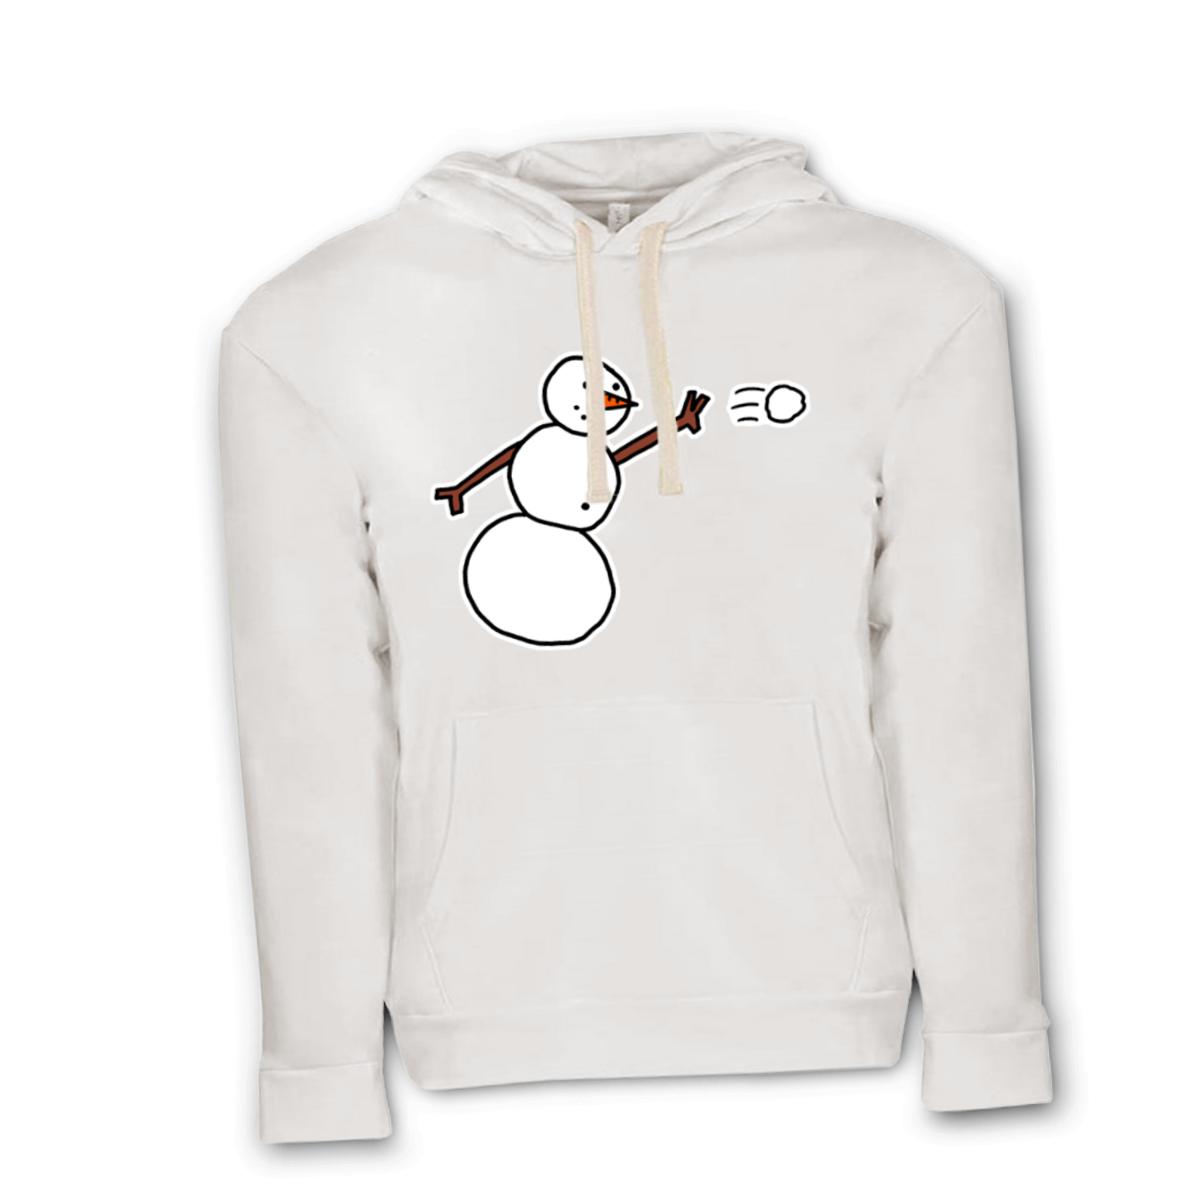 Snowman Throwing Snowball Unisex Pullover Hoodie Small white